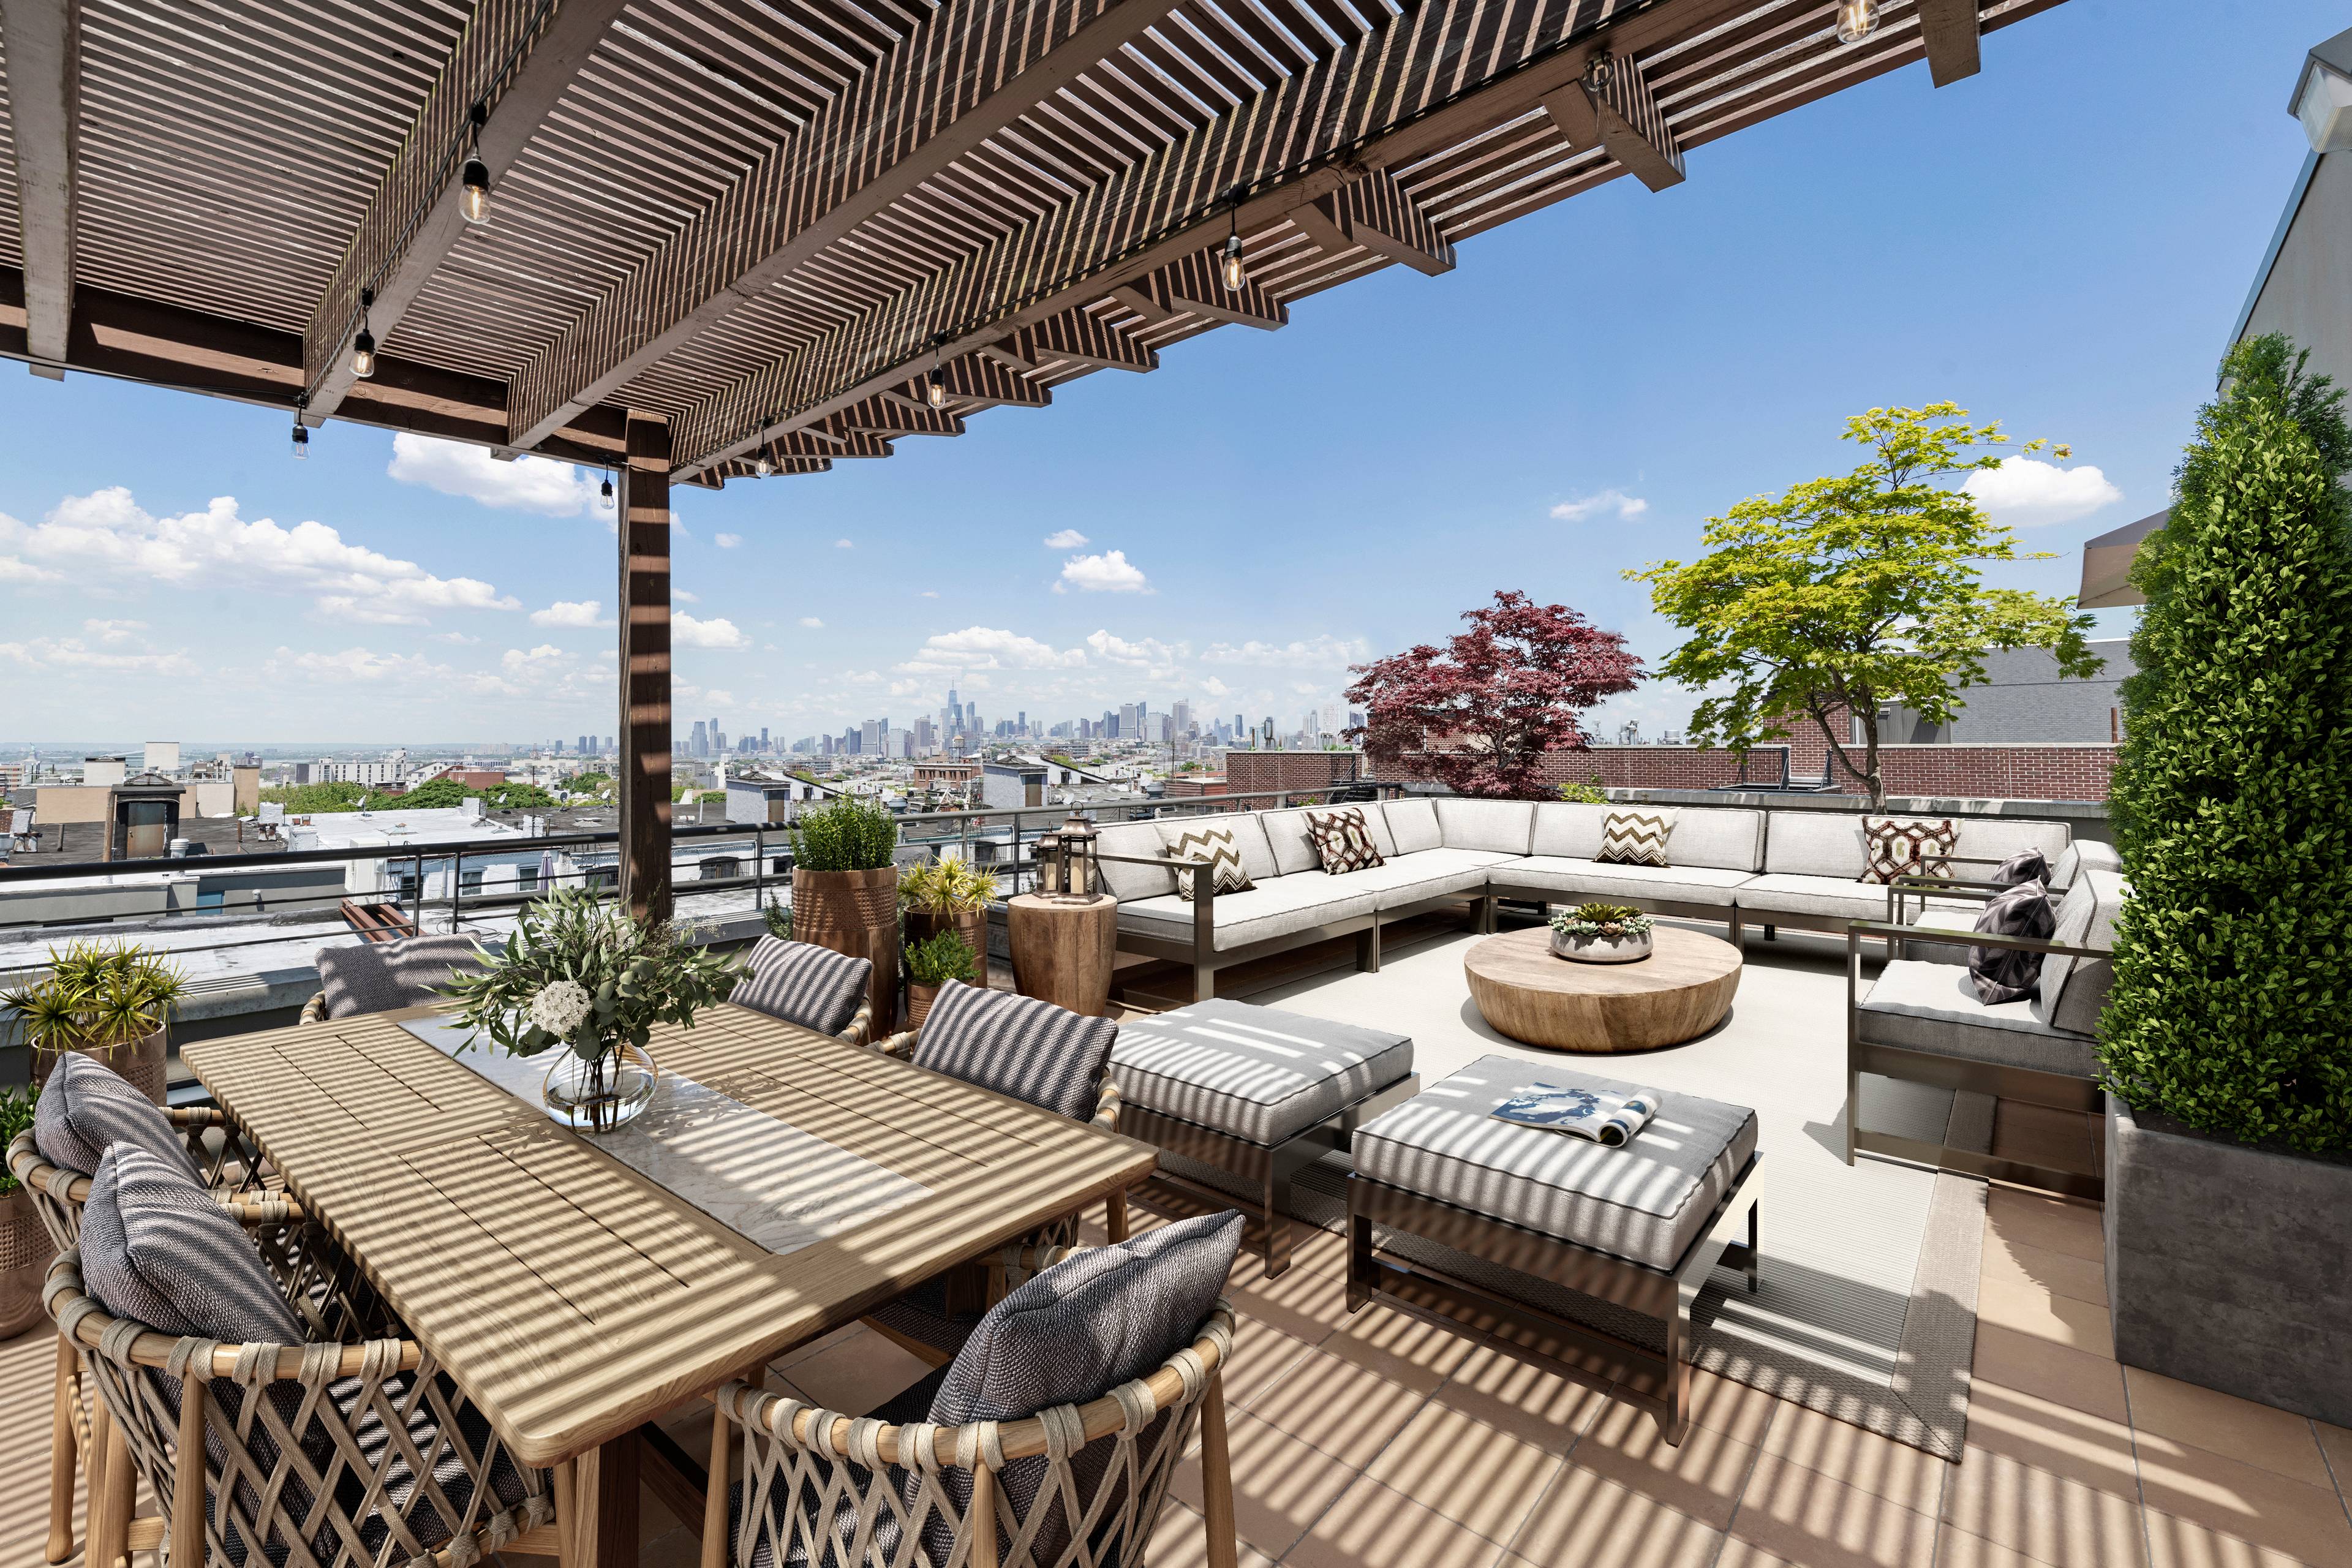 STUNNING PENTHOUSE IN PARK SLOPE WITH PRIVATE ROOF TERRACE